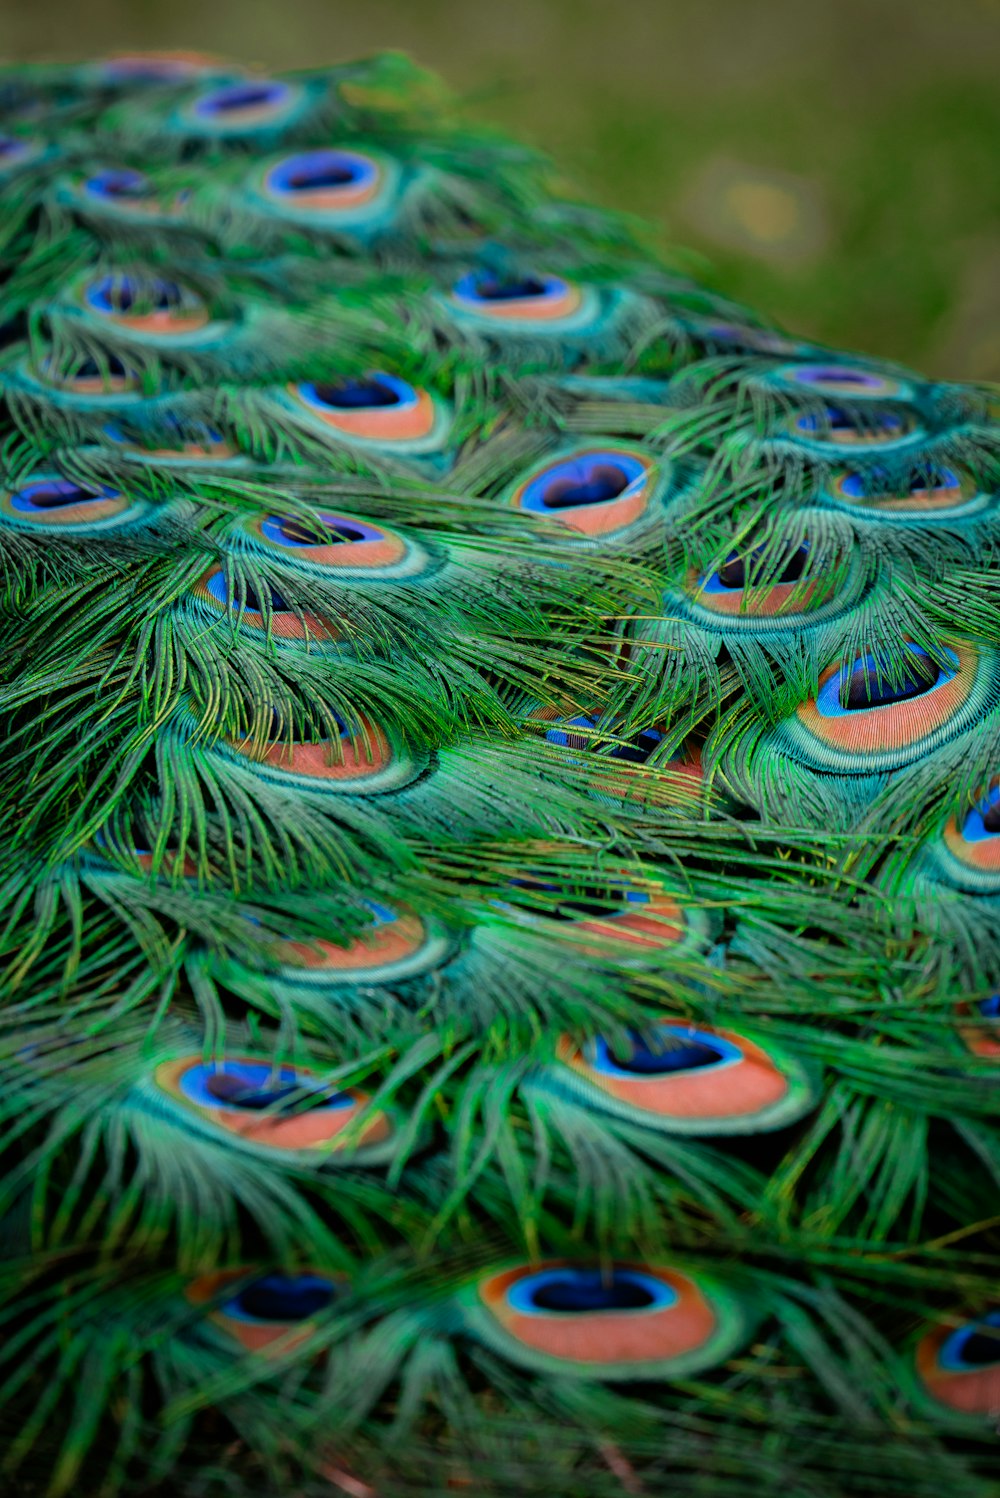 a close up of a peacock's tail feathers